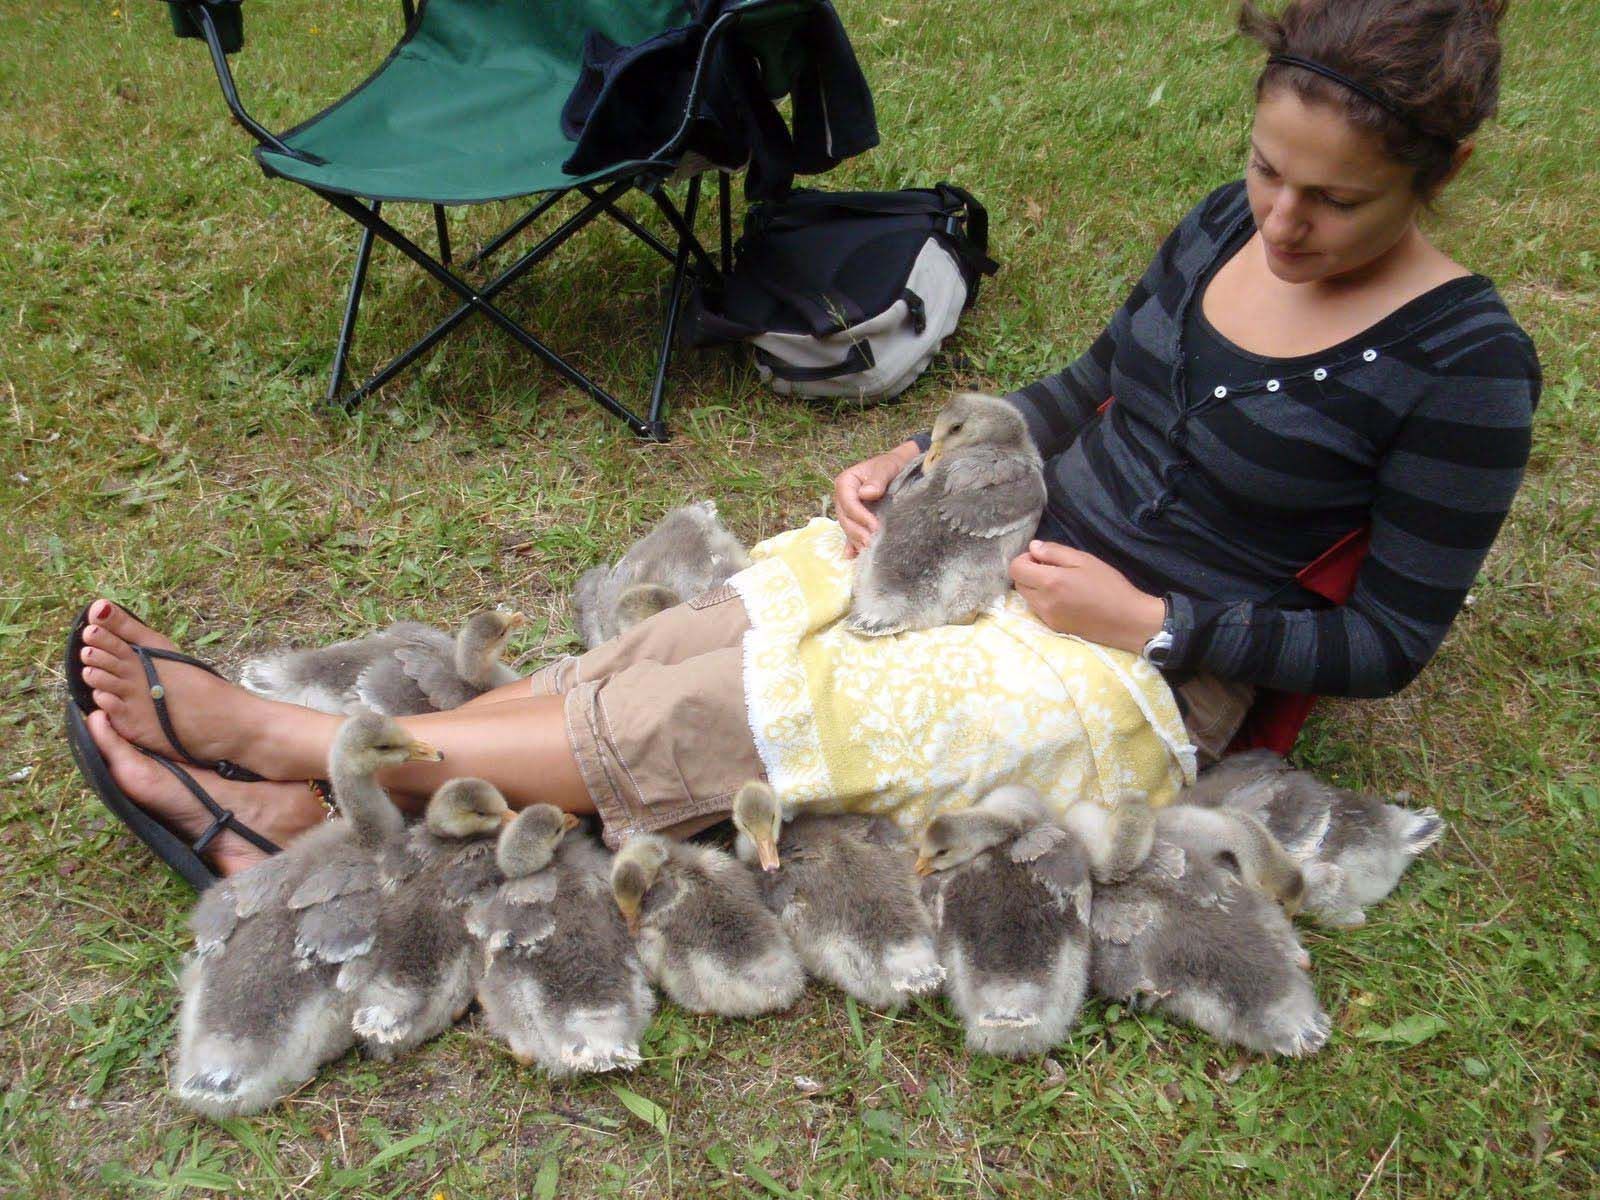 Meir is surrounded by all 12 of her imprinted gosslings.